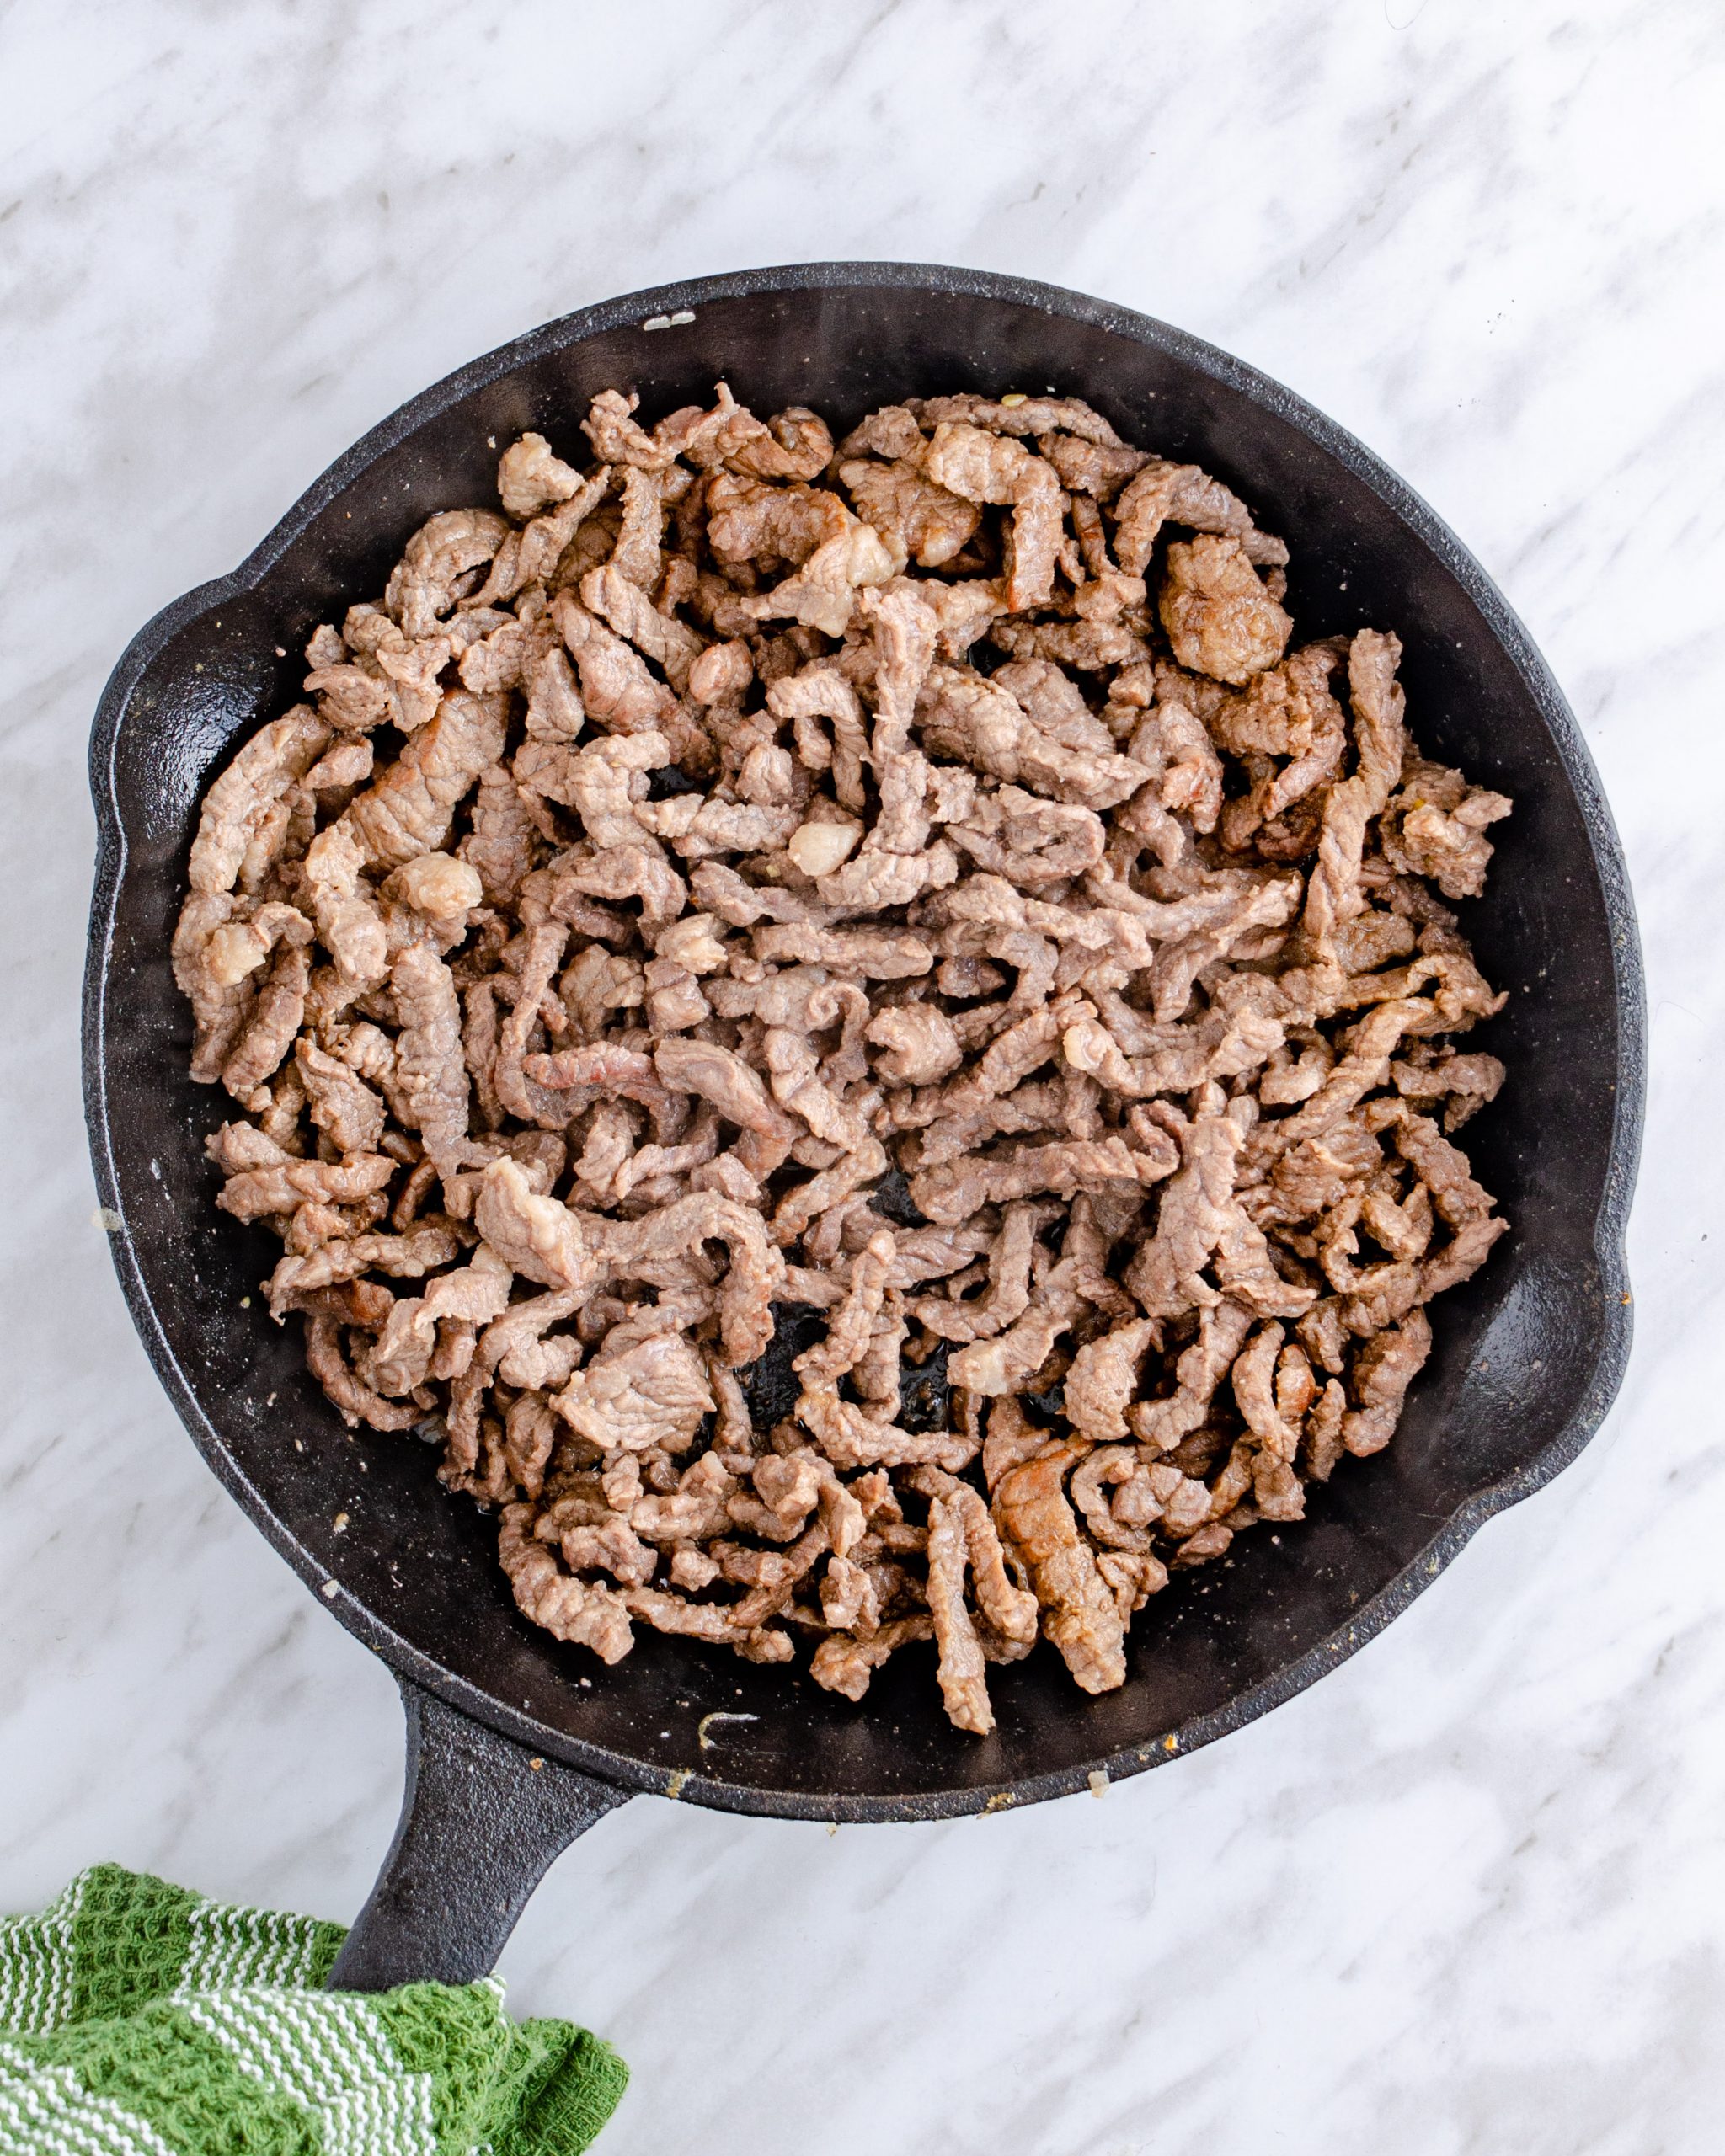 Cook the cheesesteak meat until browned and set aside.